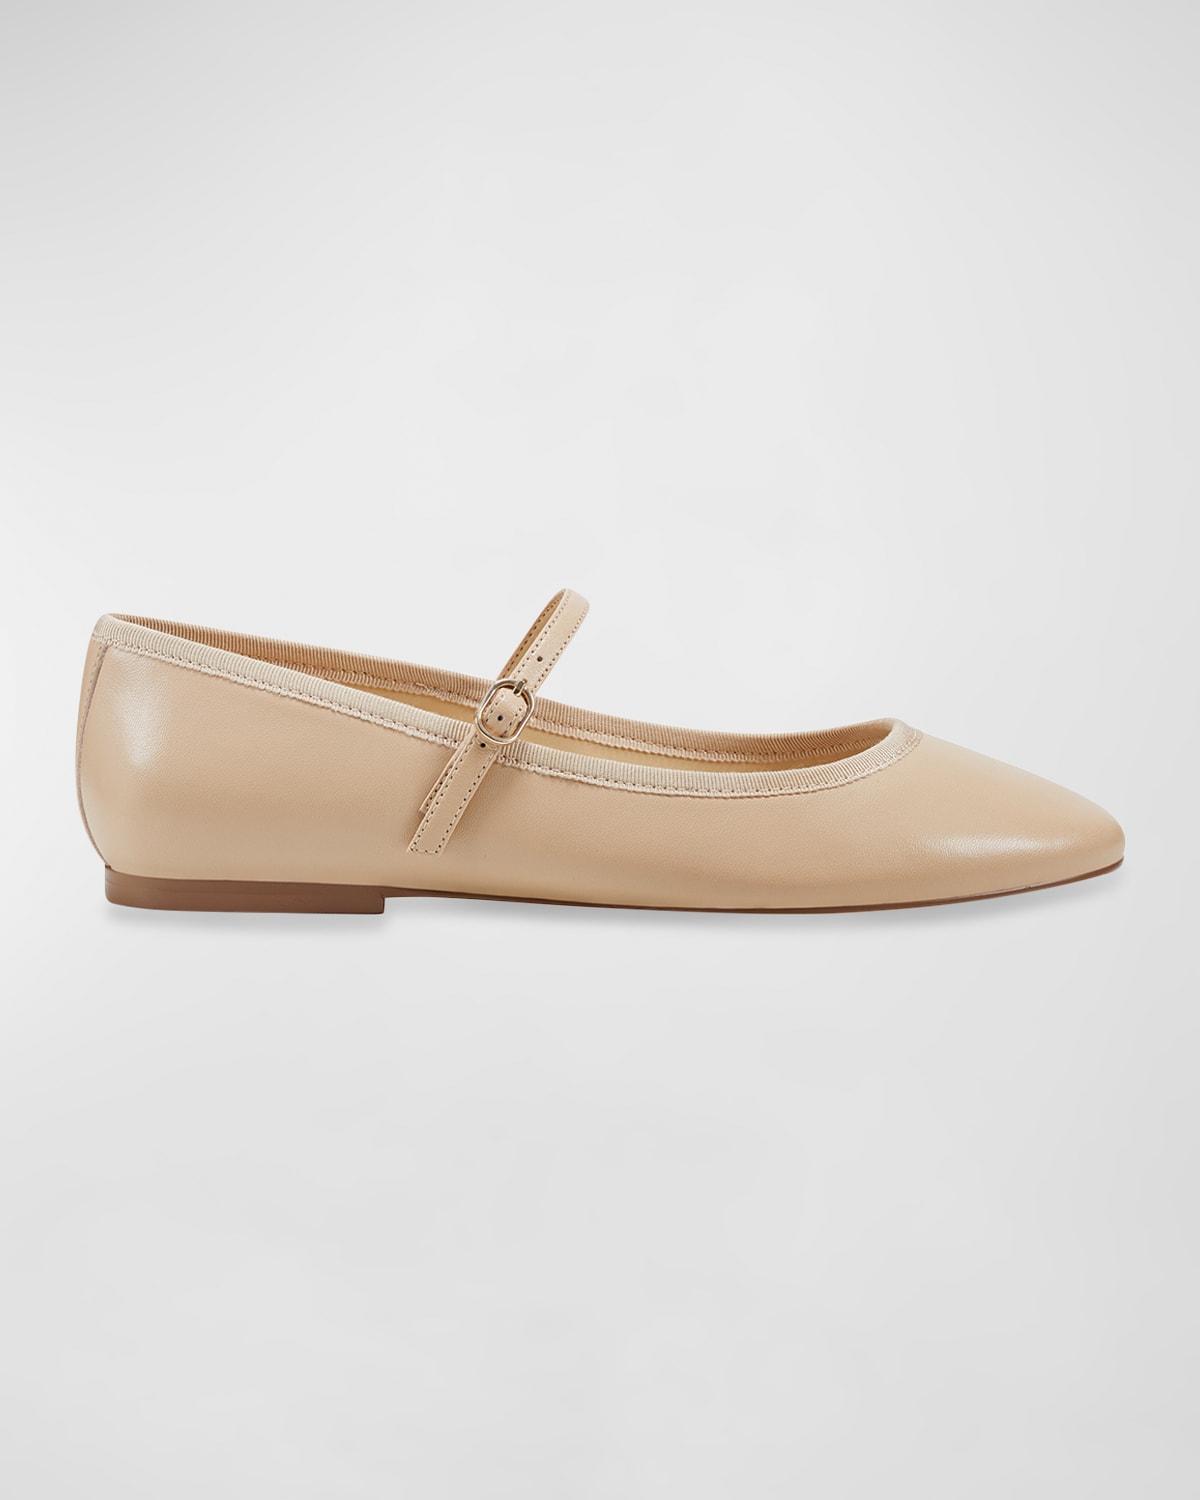 Shop Marc Fisher Ltd Espina Leather Mary Jane Ballerina Flats In Light Natural